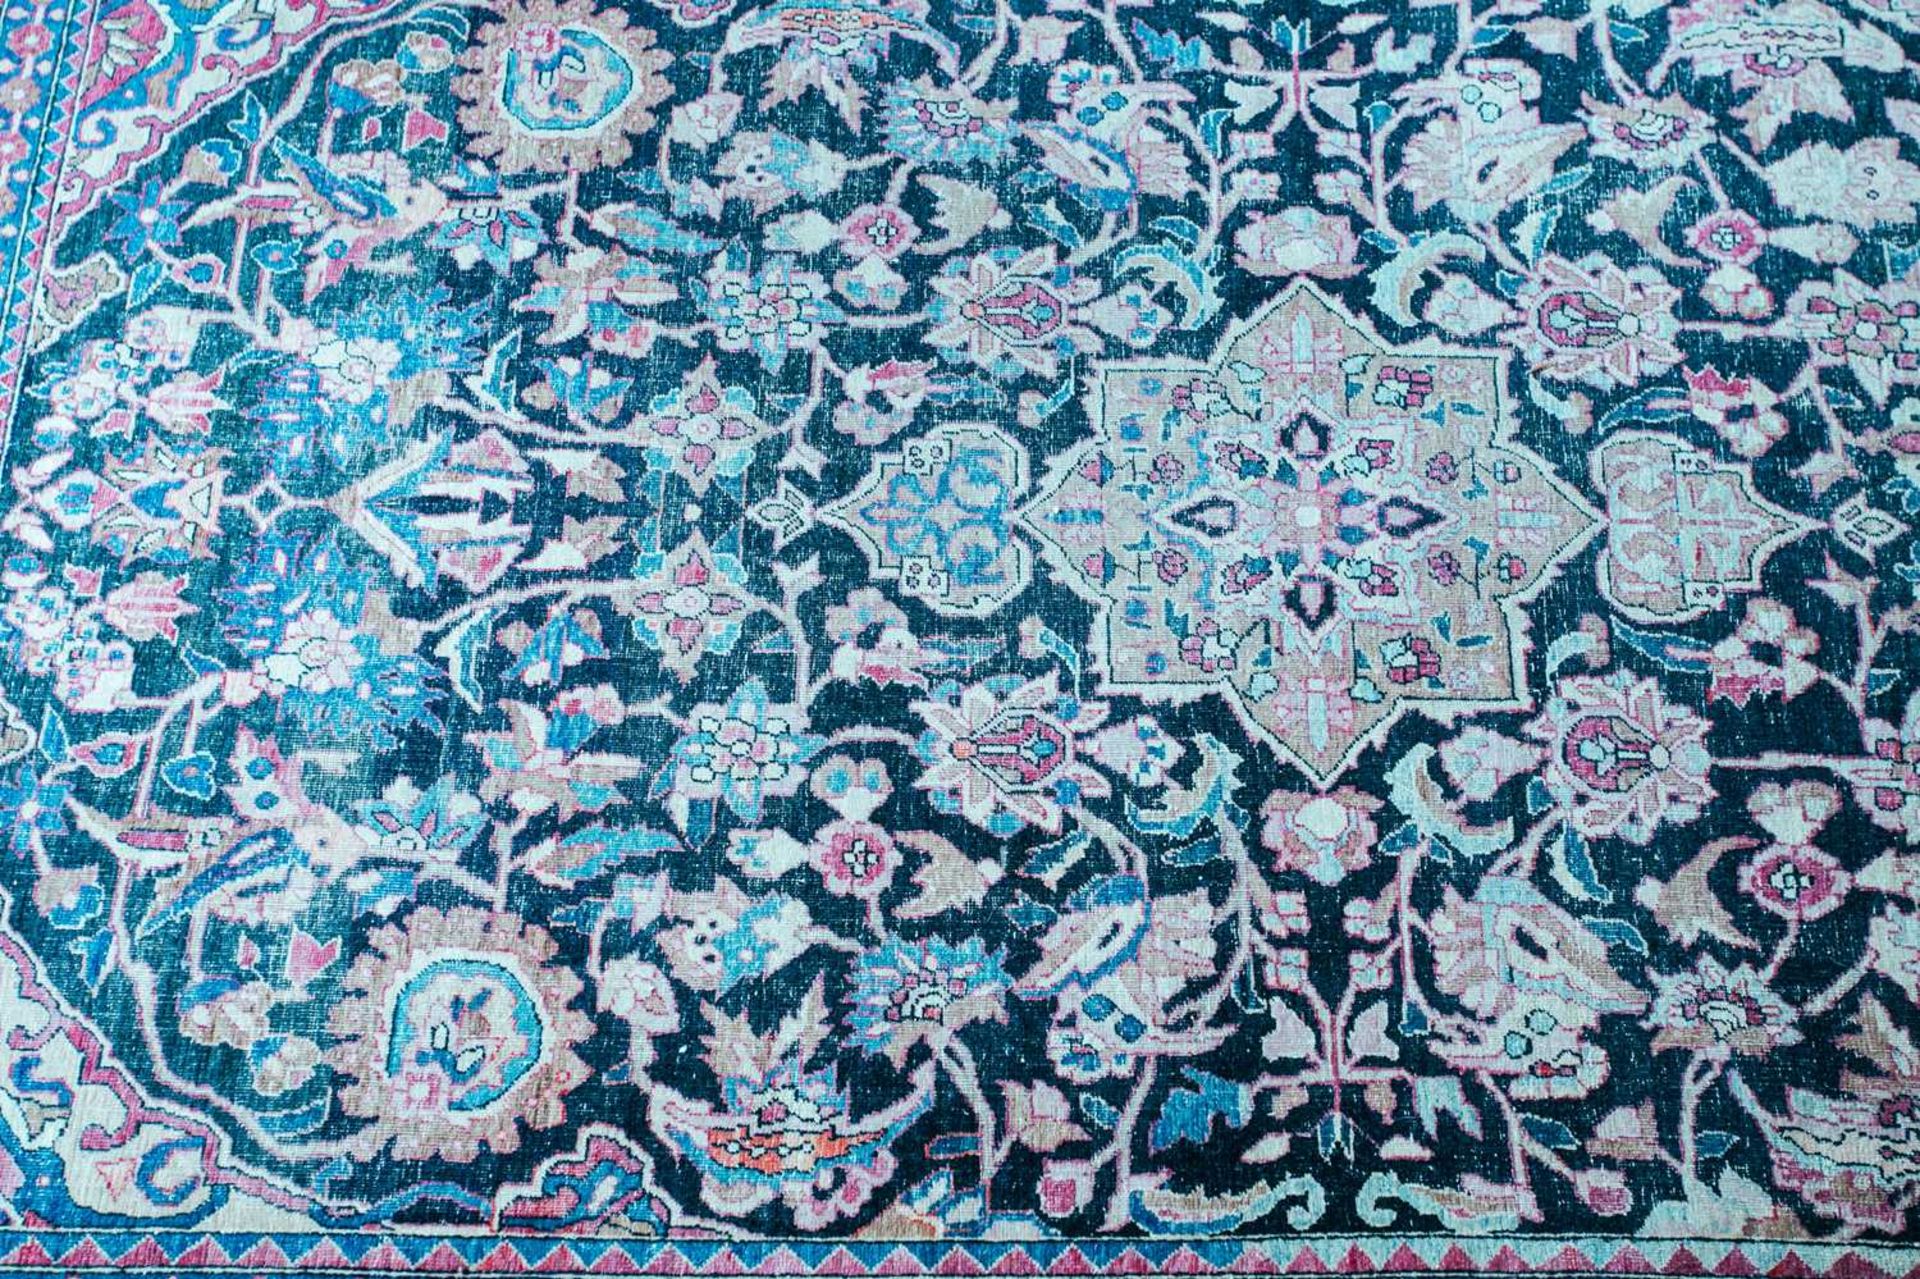 An antique black/blue ground Kerman carpet, with a central star and corners with multiple vines - Image 2 of 3